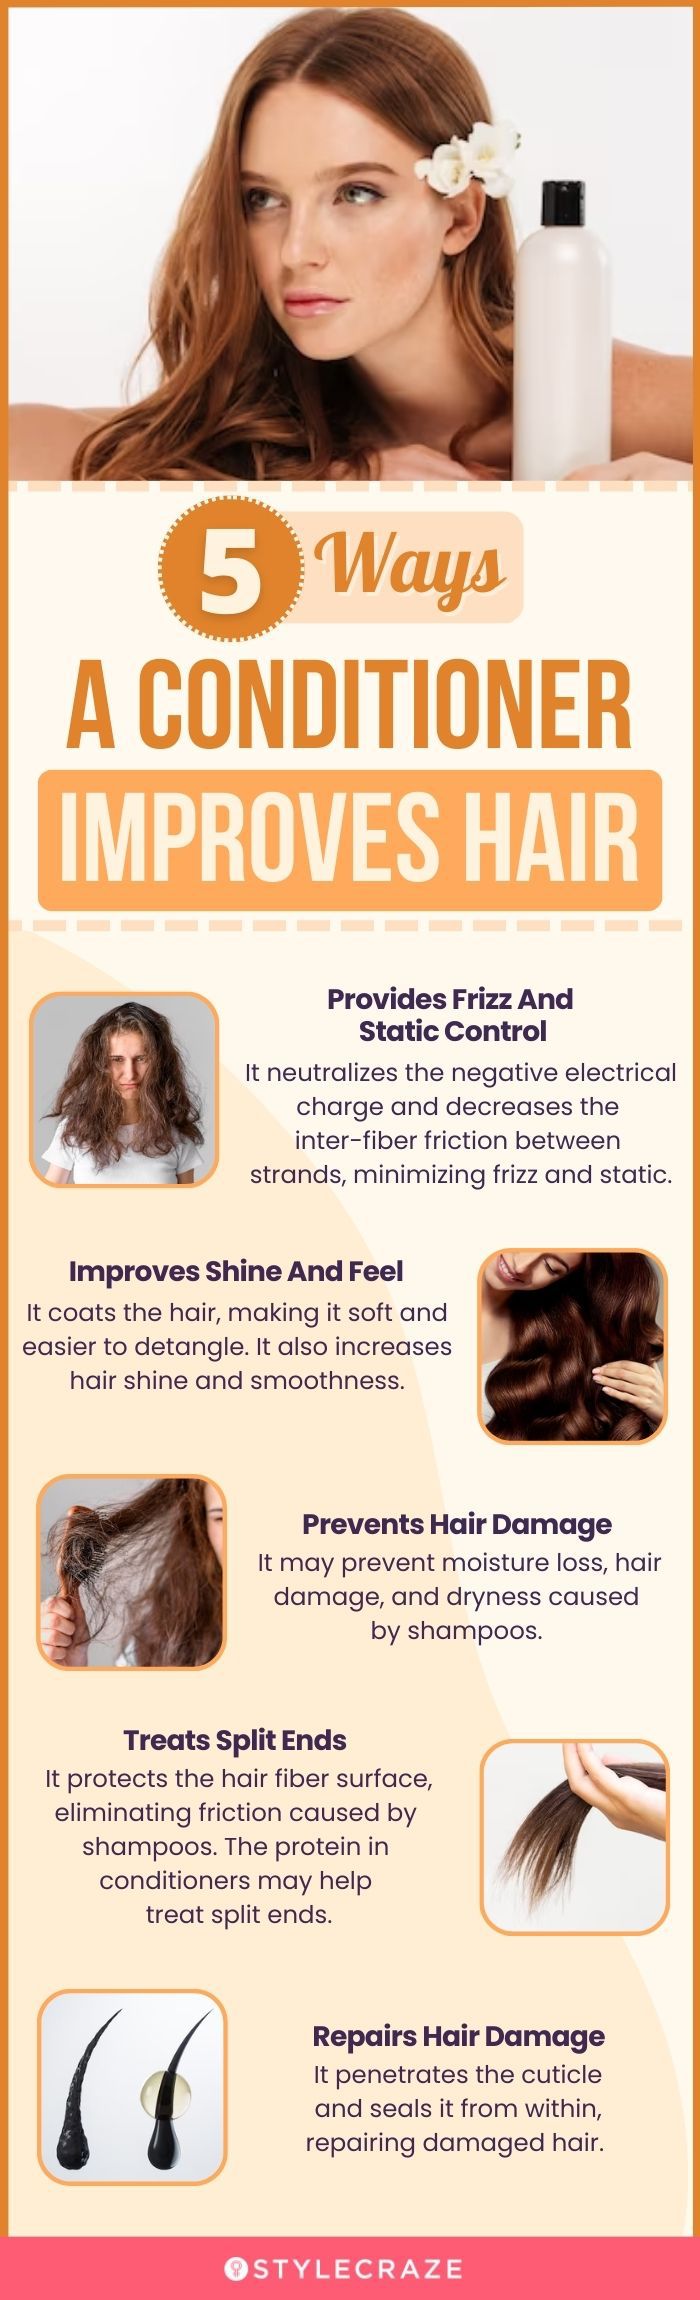 5 ways a conditioner improves hair (infographic)